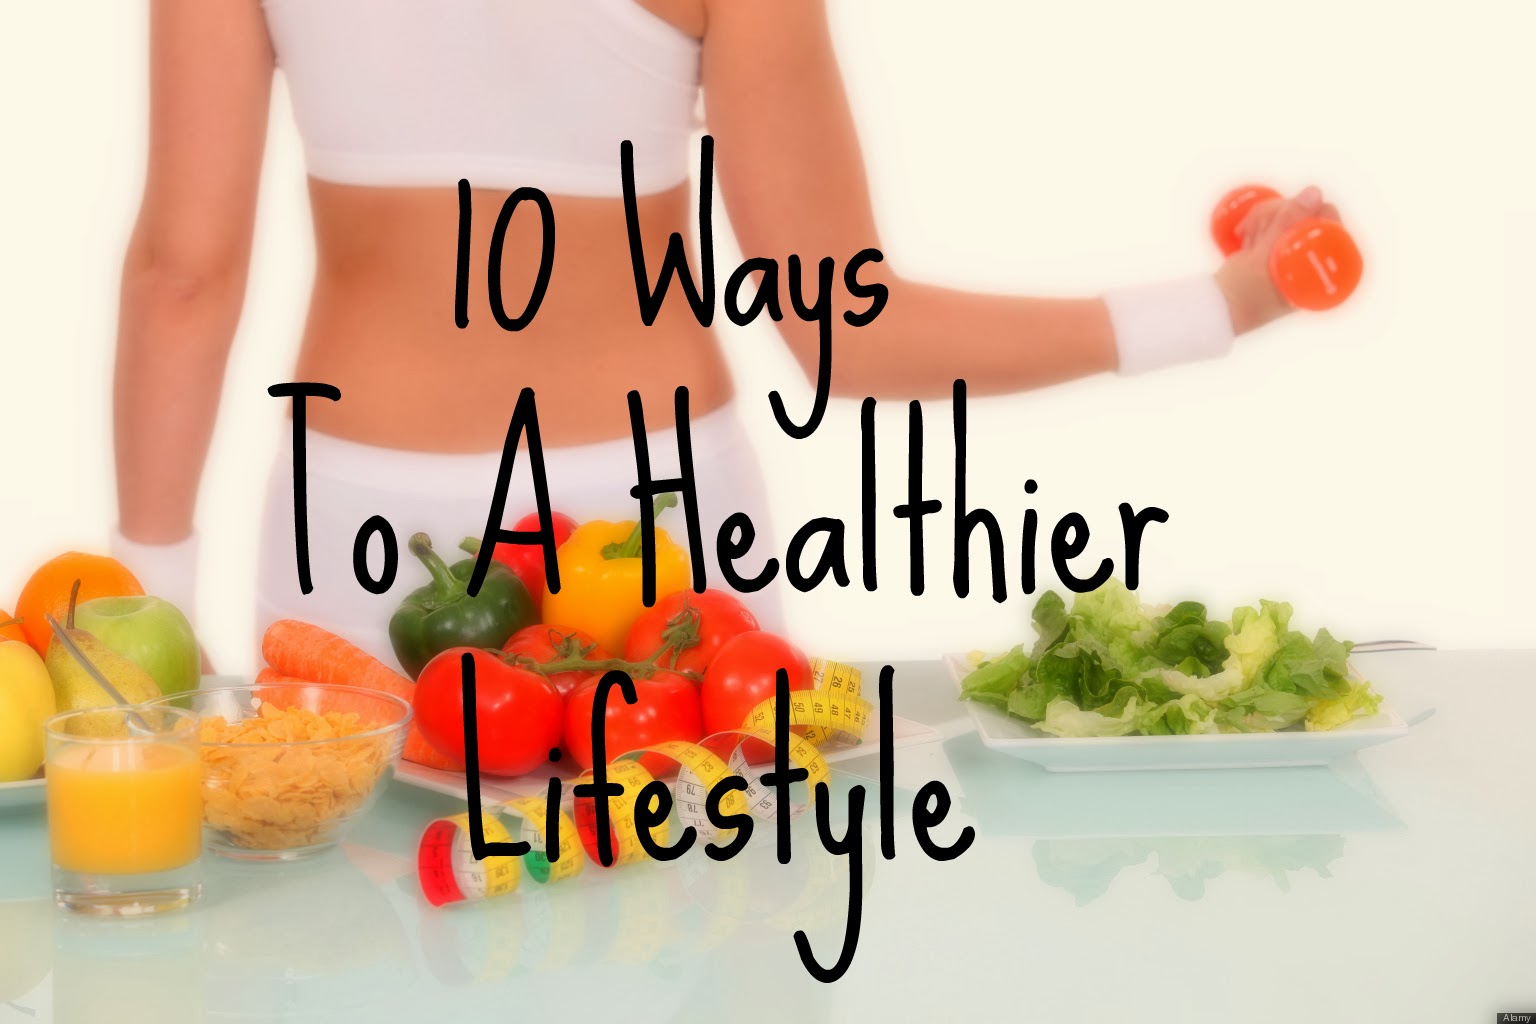 Laura Thornberry : 10 Ways To A Healthier Lifestyle